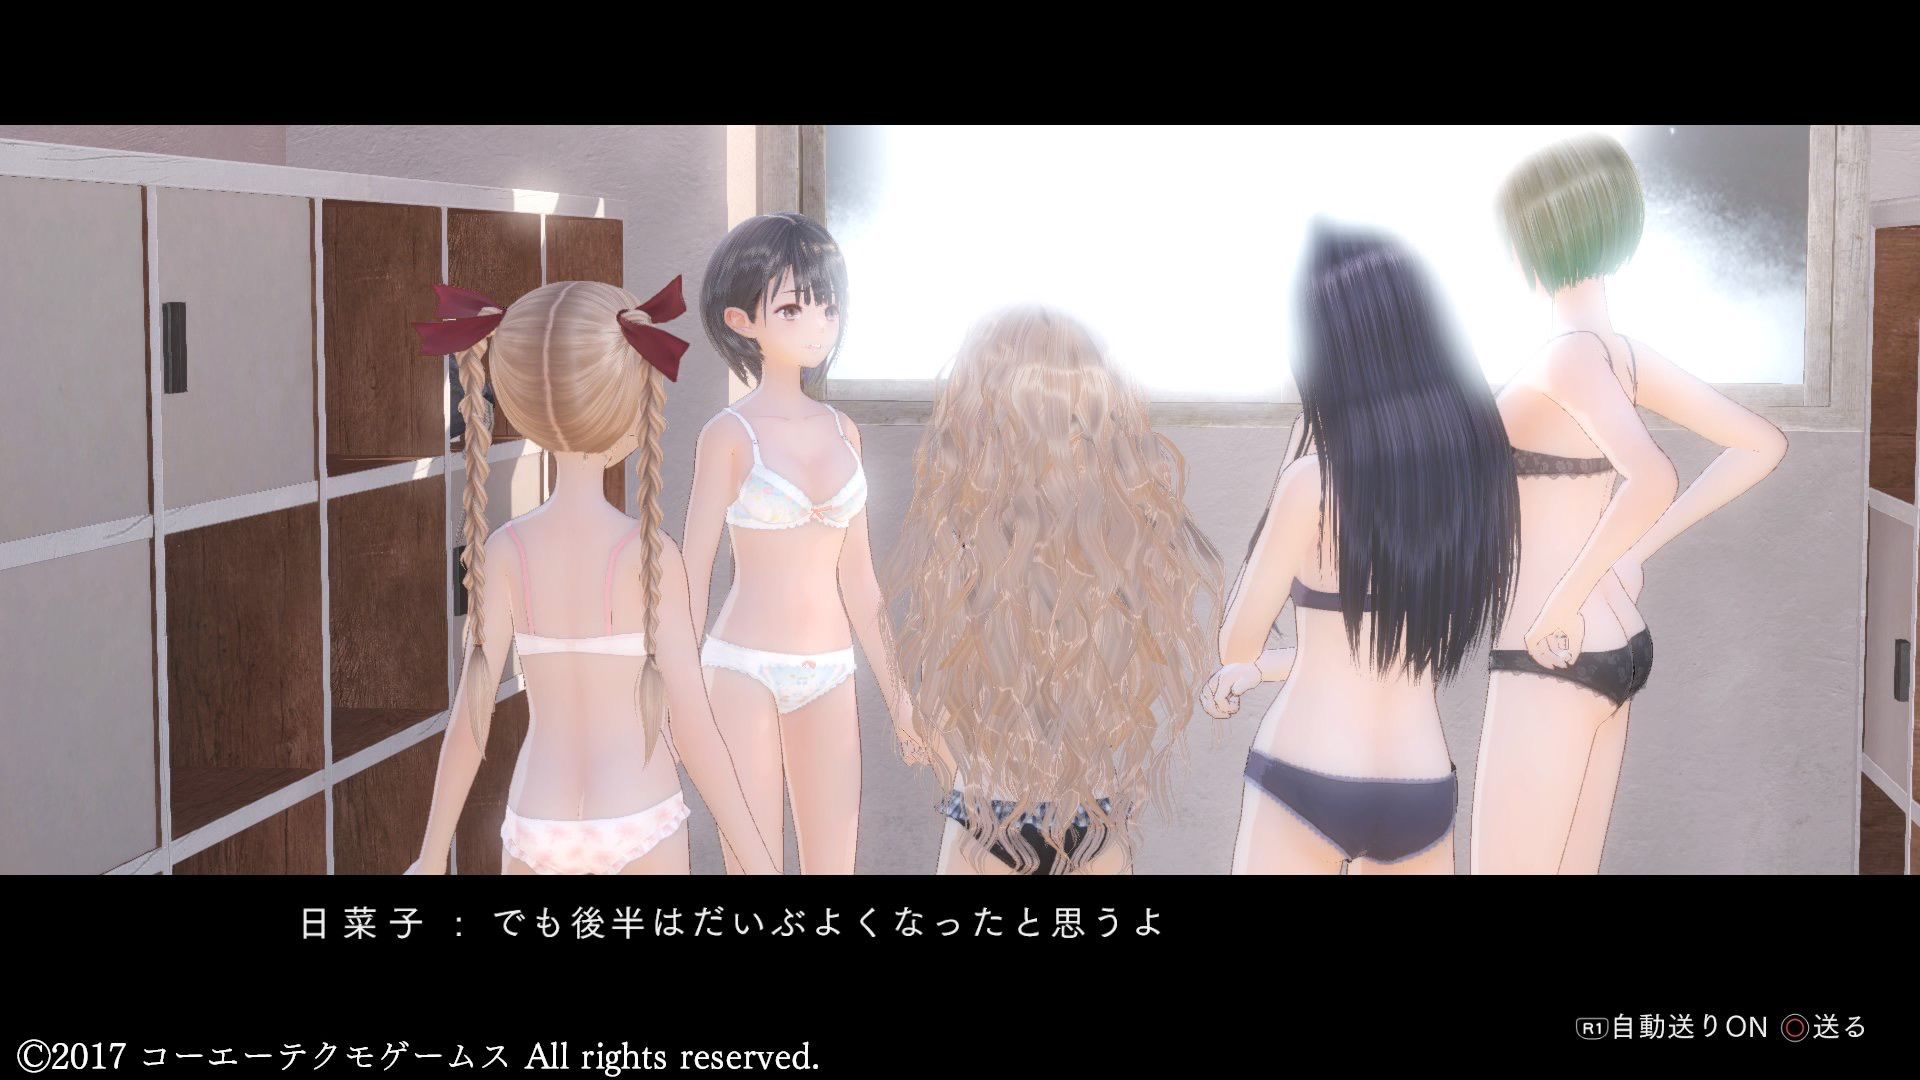 [image] Game H with a view of the underwear passes; ワロタ wwwwwwwww 6